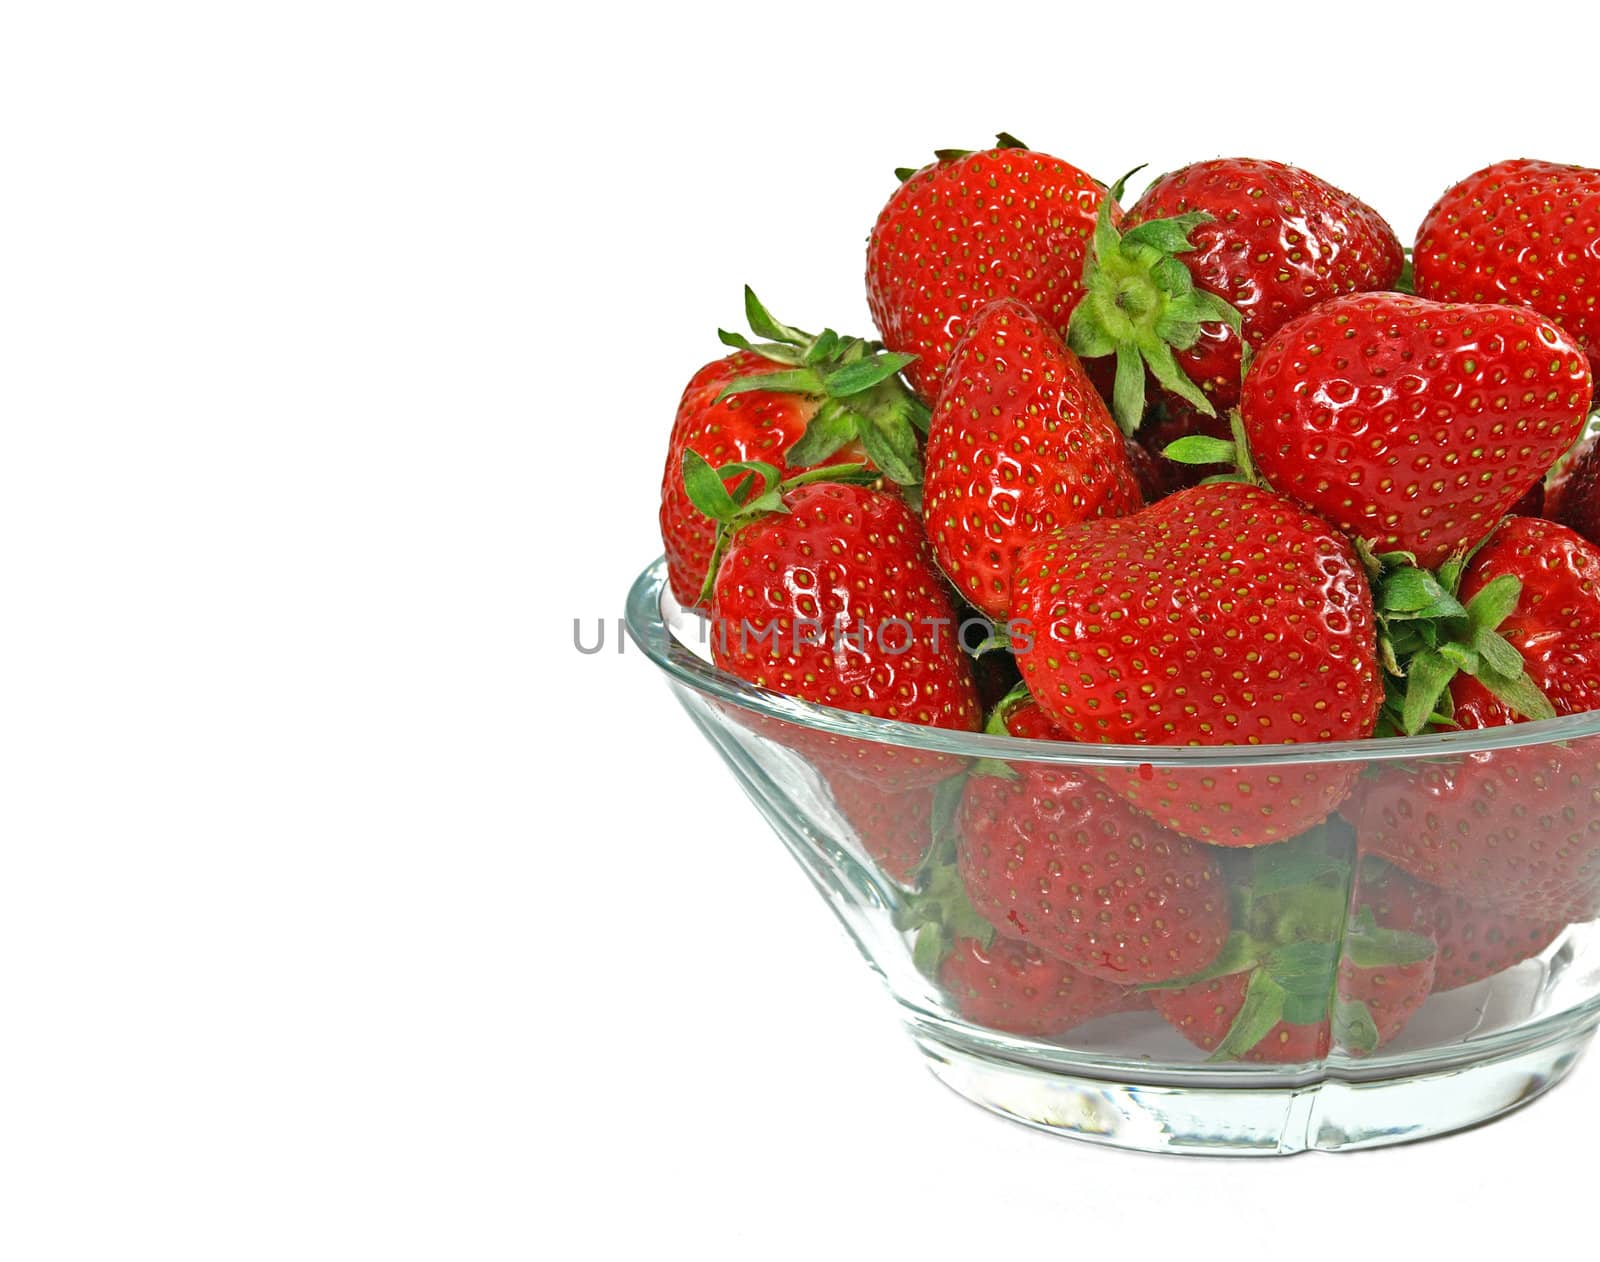 fresh and juicy strawberries on glass bowl over white by Ric510